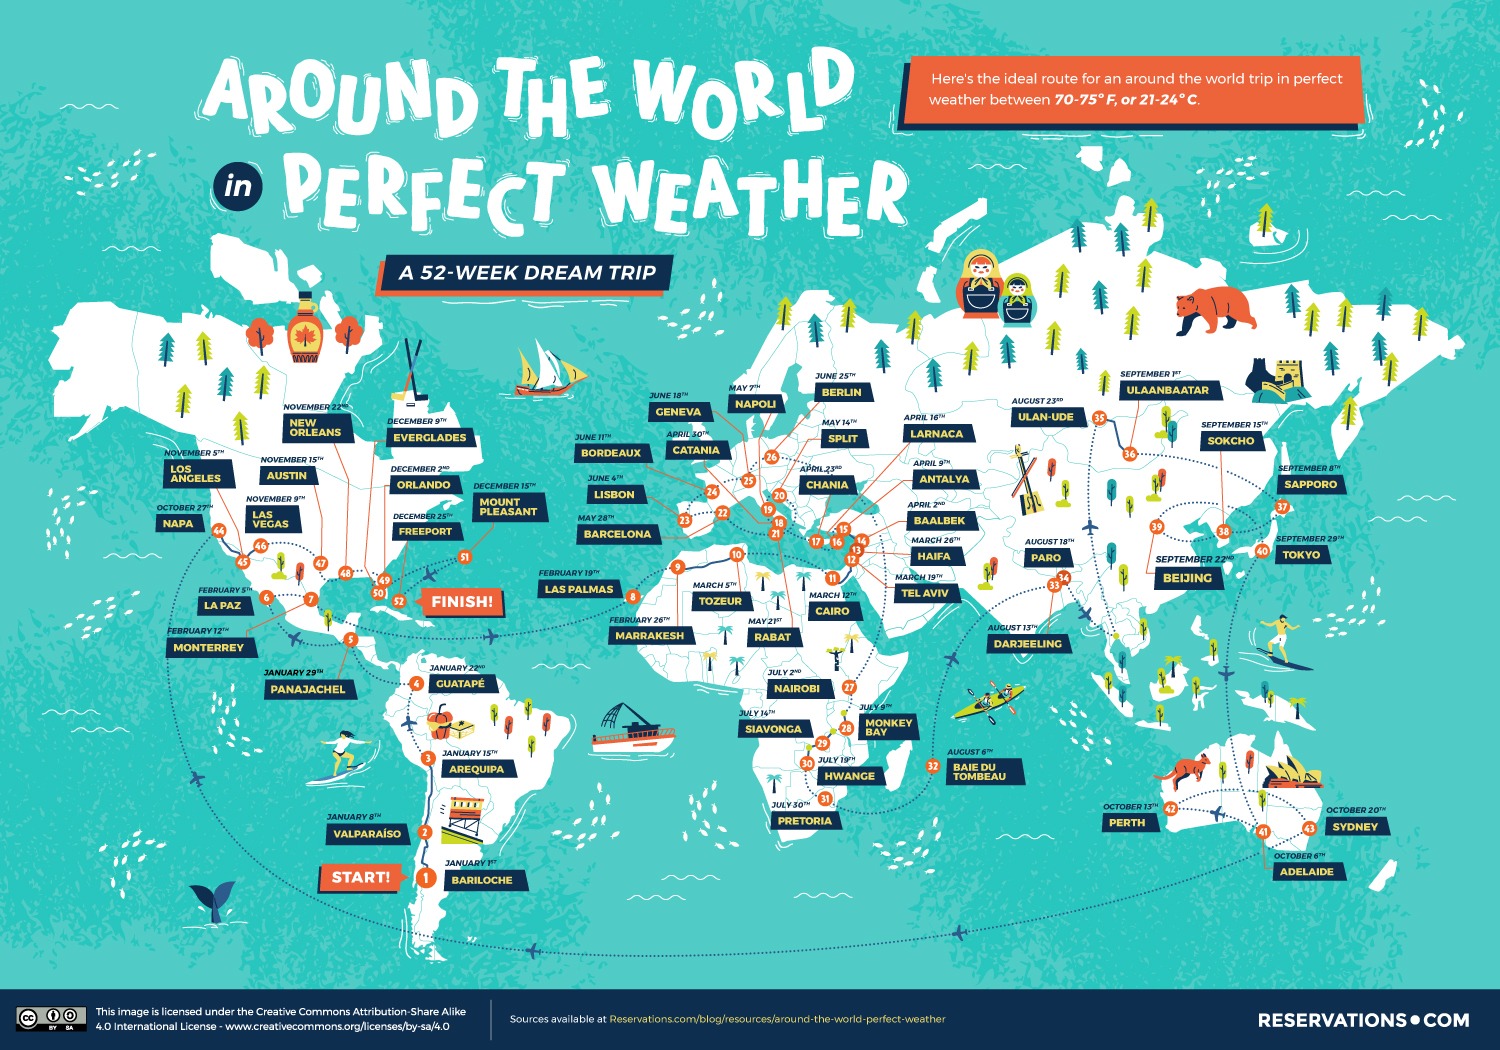 weather around the world map Around The World In Perfect Weather A 52 Week Dream Trip weather around the world map